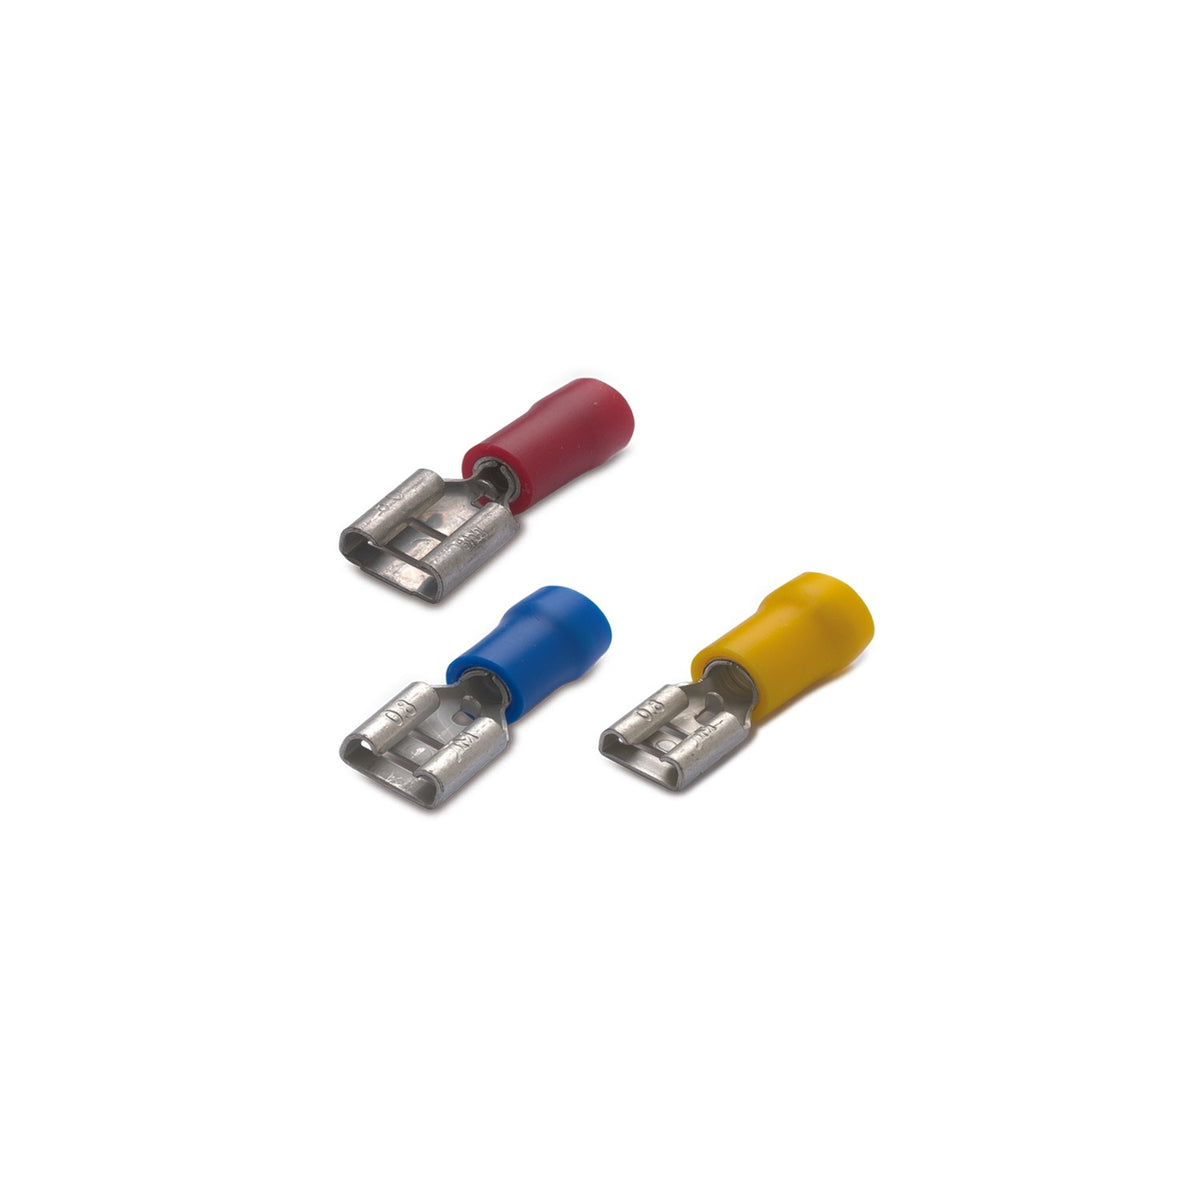 Female faston terminal lug for electrical wire in red, blue and yellow colors